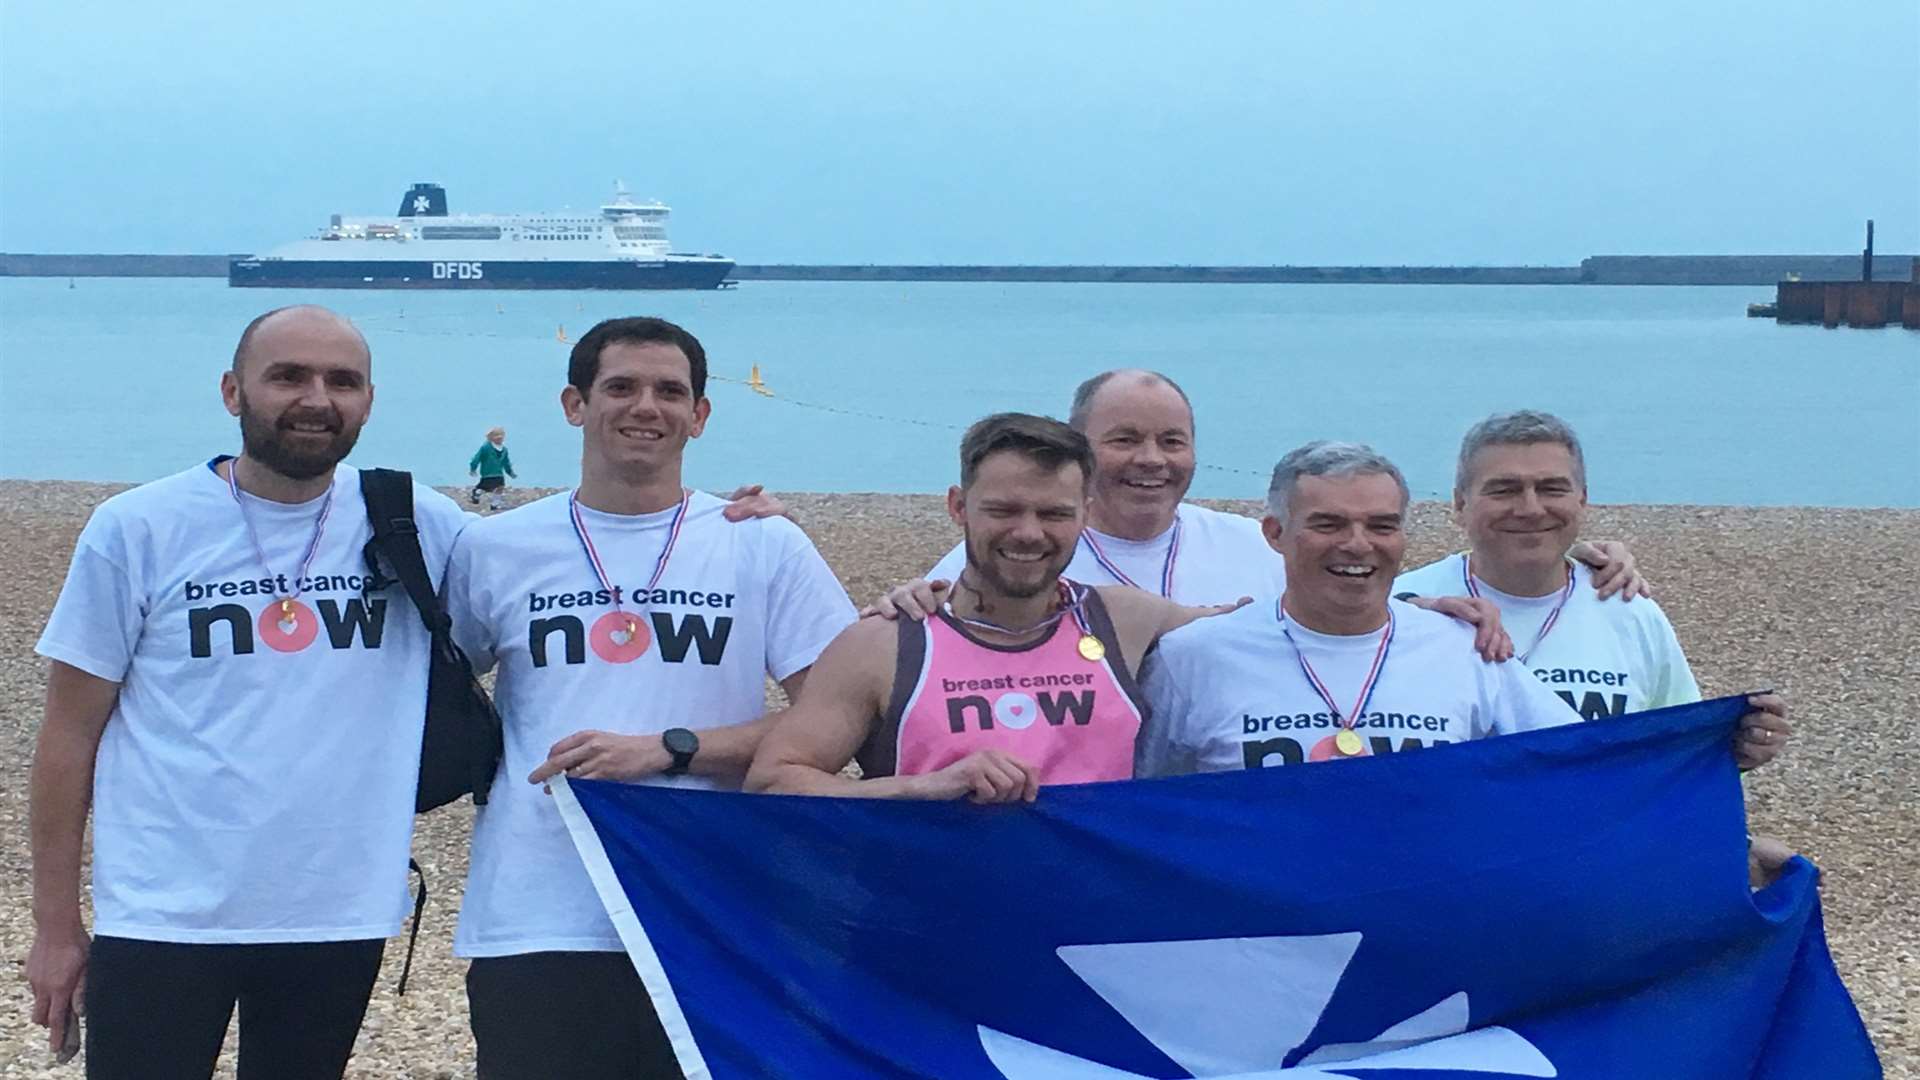 The runners at their finishing line at Dover seafront. Picture courtesy of DFDS